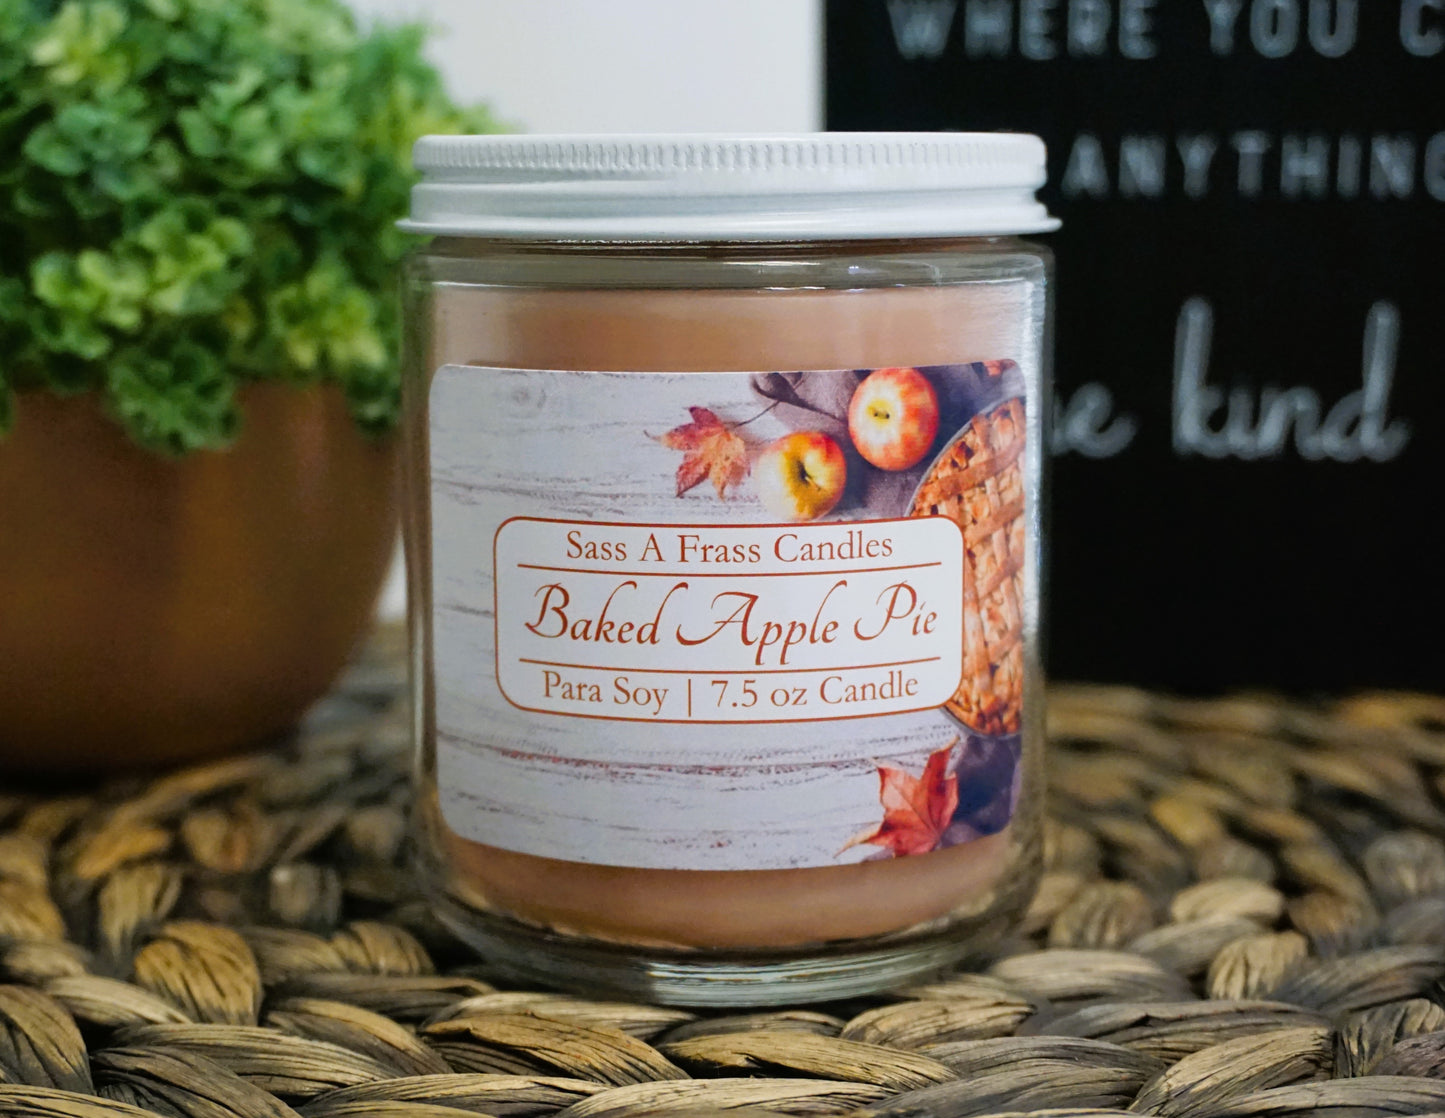 Baked Apple Pie 7.5 oz Candle